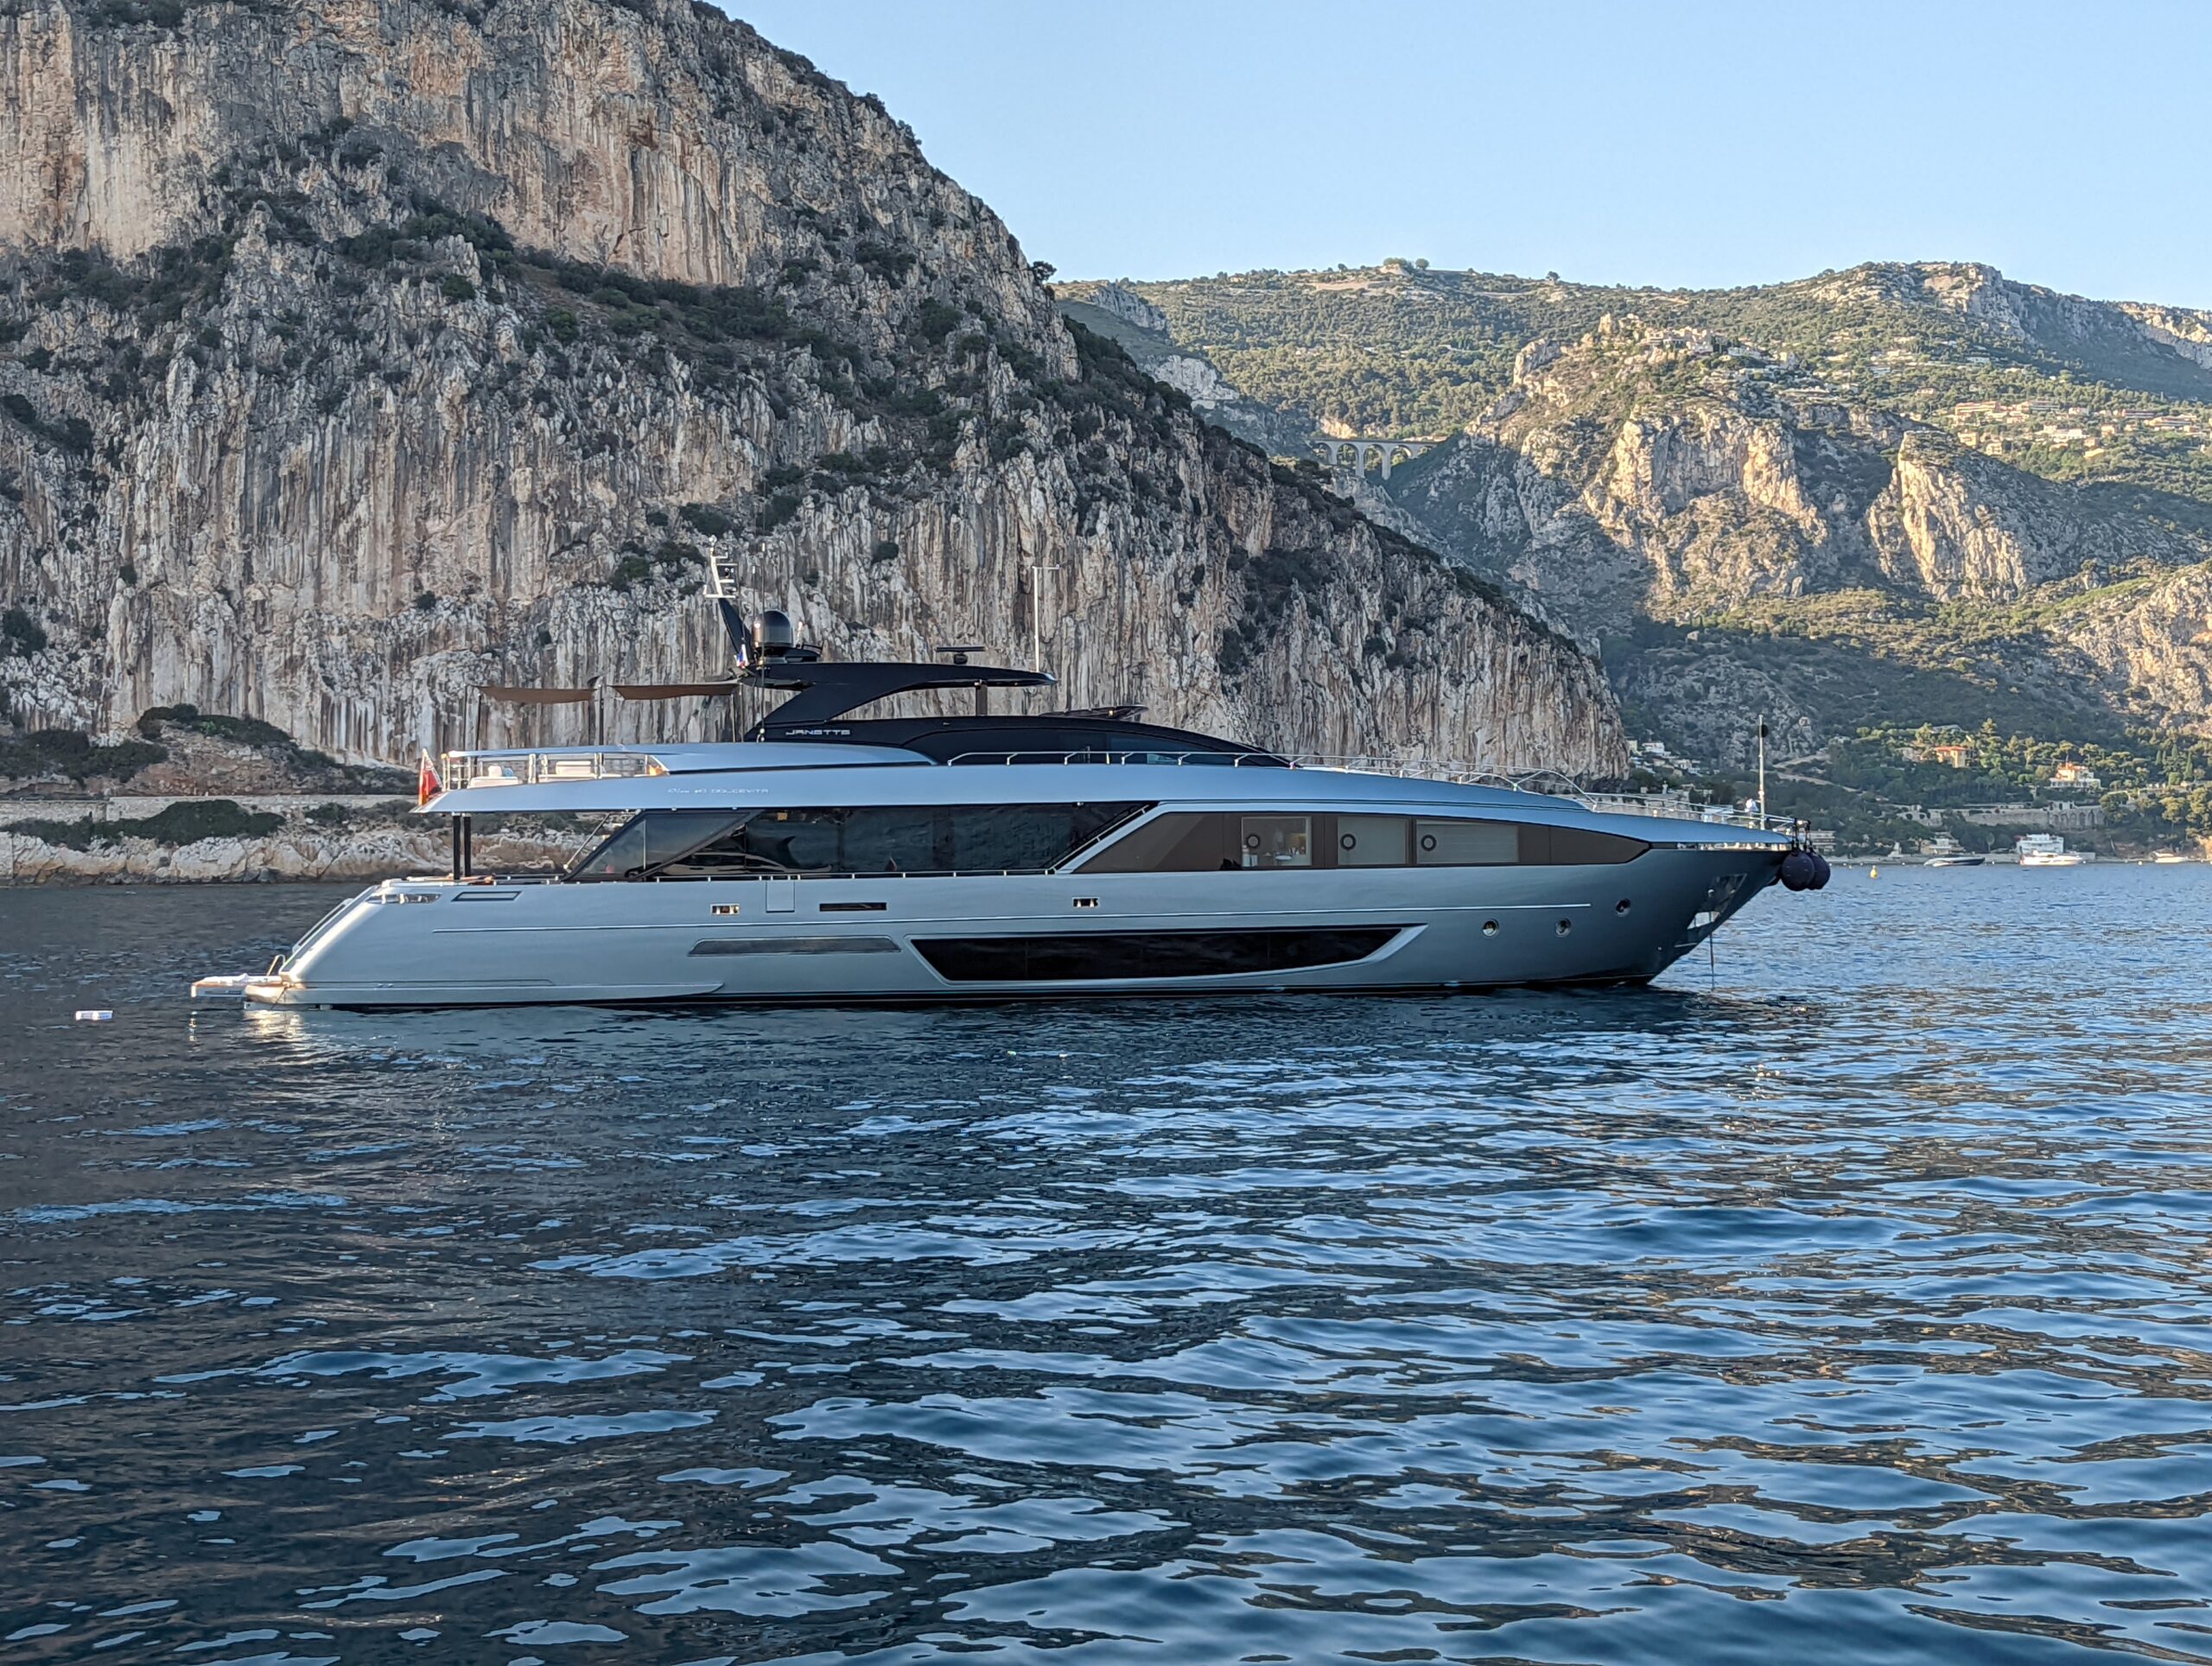 Riva 110' Dolcevita Yachts for Sale - Pre-owned Riva 110' Dolcevita ...